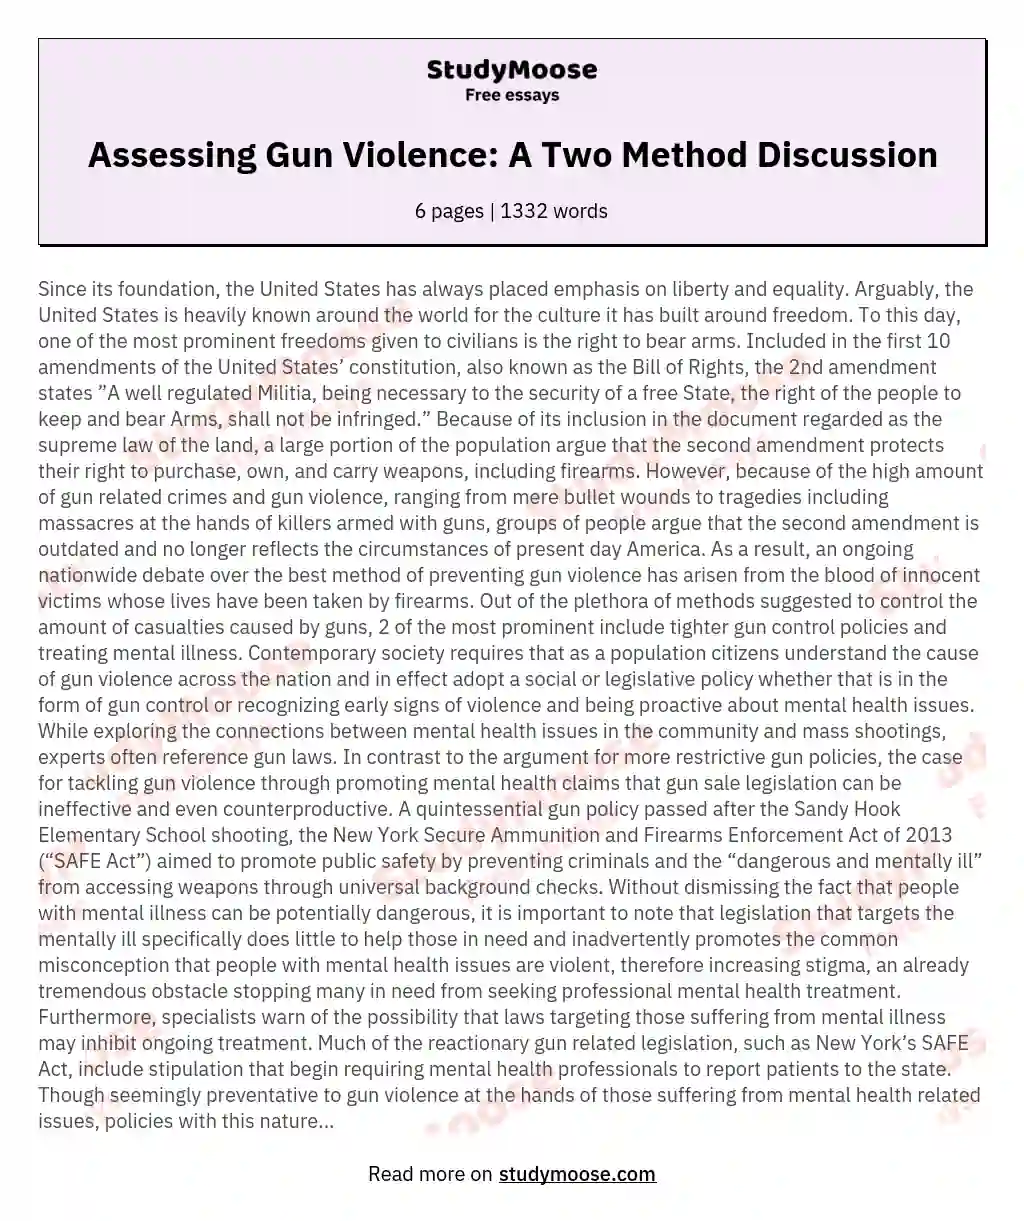 Assessing Gun Violence: A Two Method Discussion essay